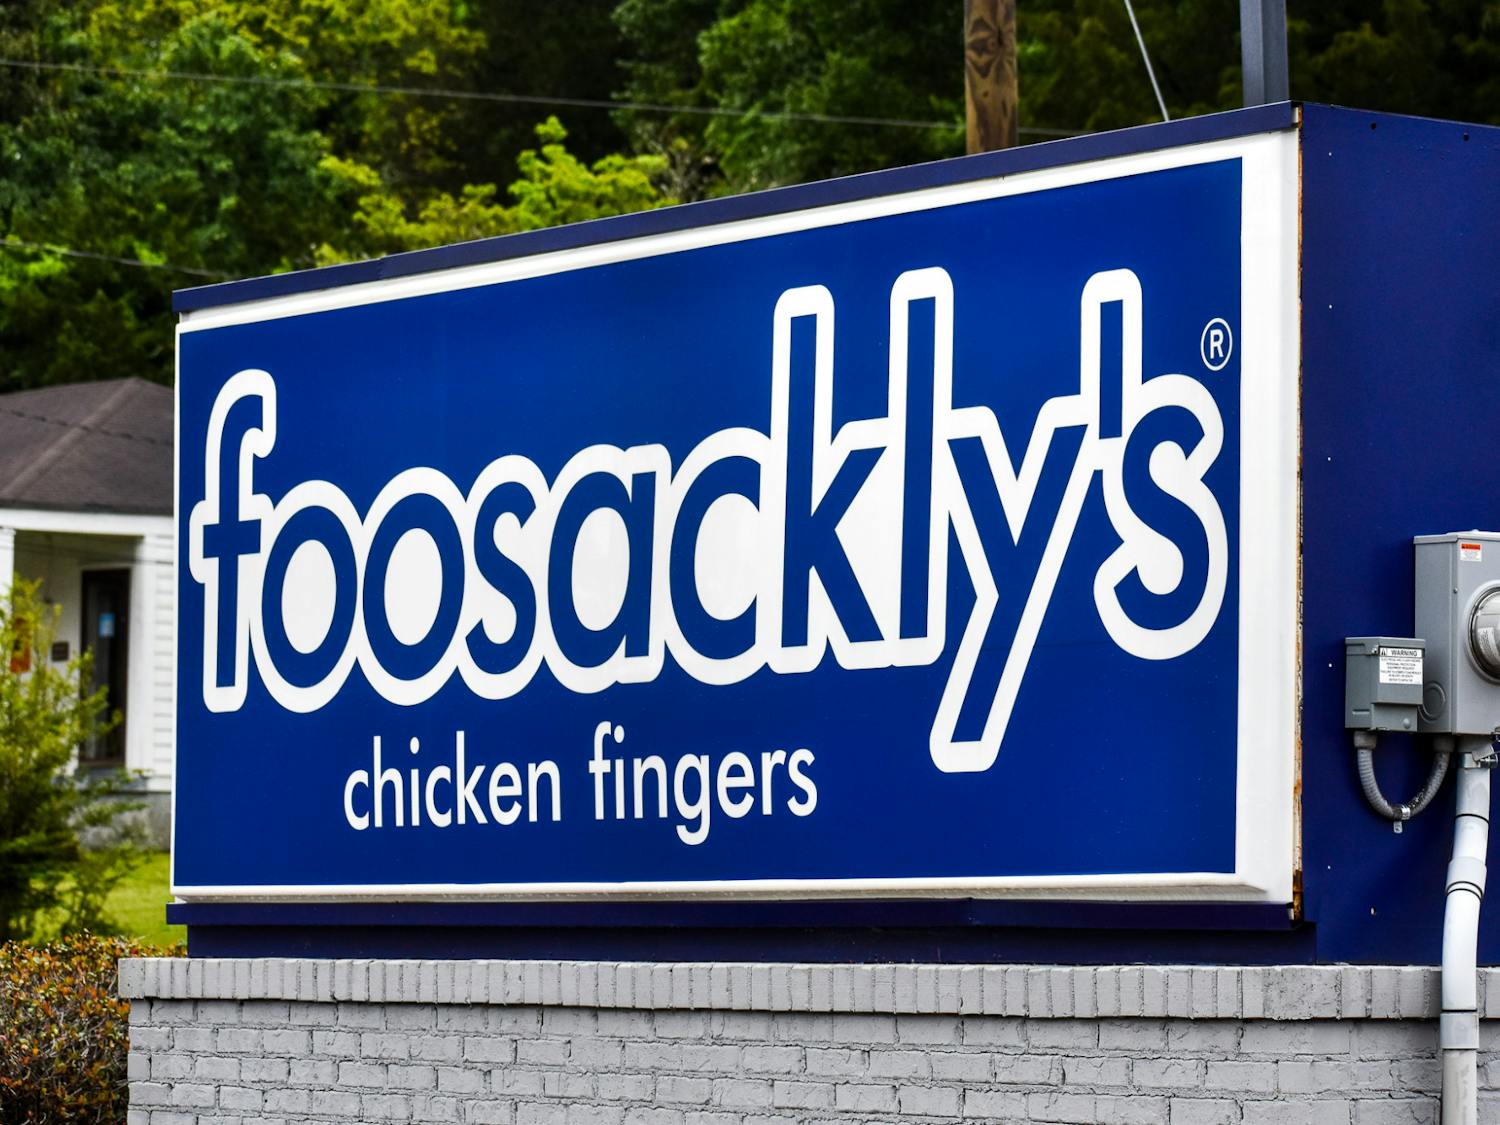 Plainsman's Choice for Best Chicken - Foosackly's